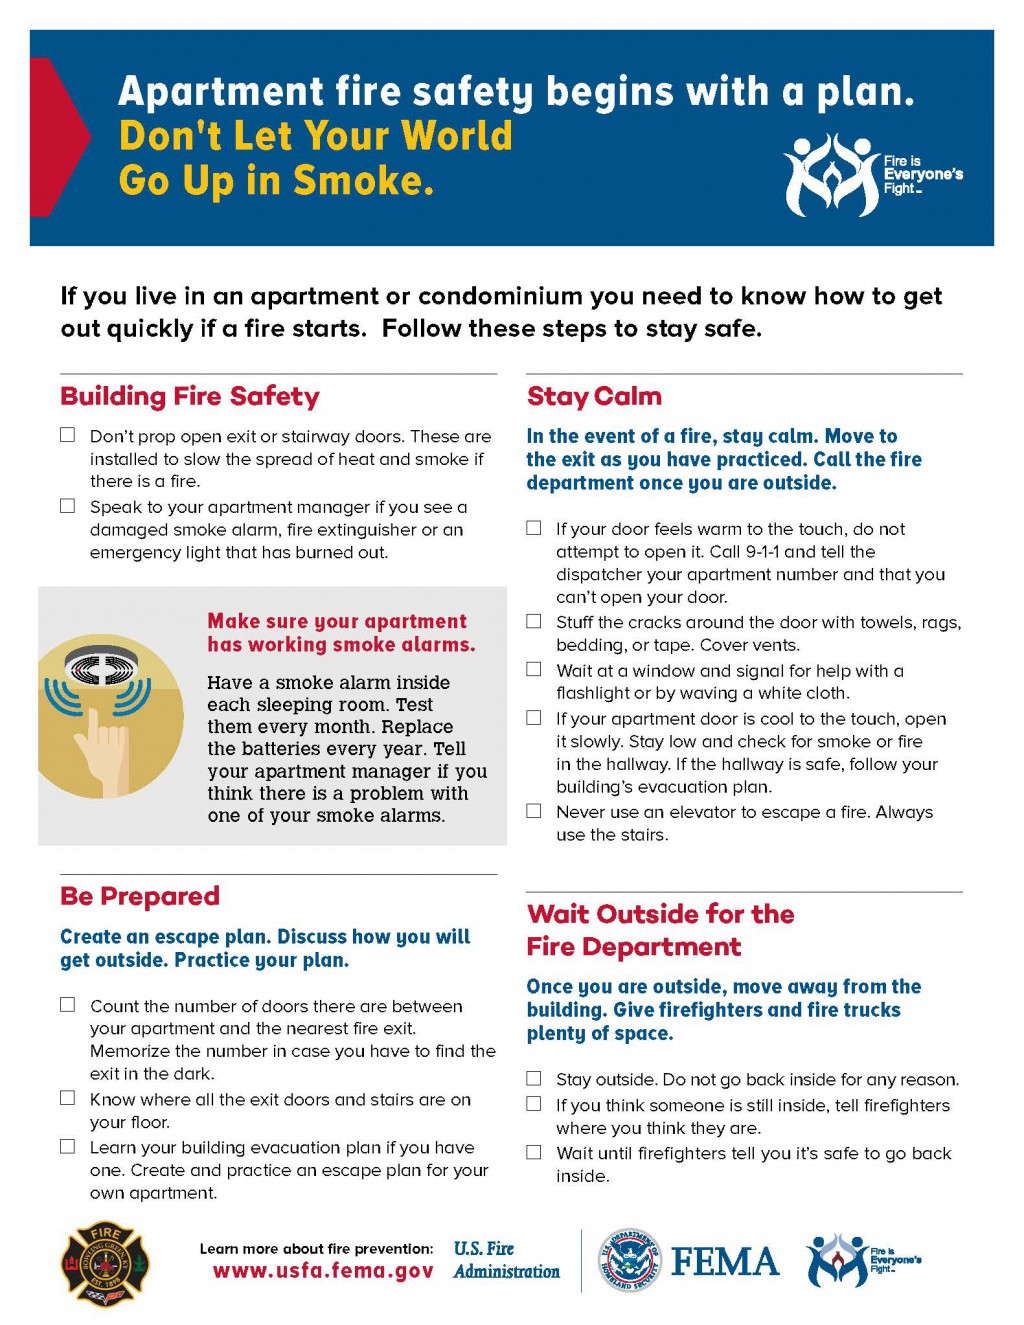 Apartment fire safety begins with a plan.
Don't Let Your World
Go Up in Smoke.
If you live in an apartment or condominium you need to know how to get
out quickly if a fire starts. Follow these steps to stay safe.  